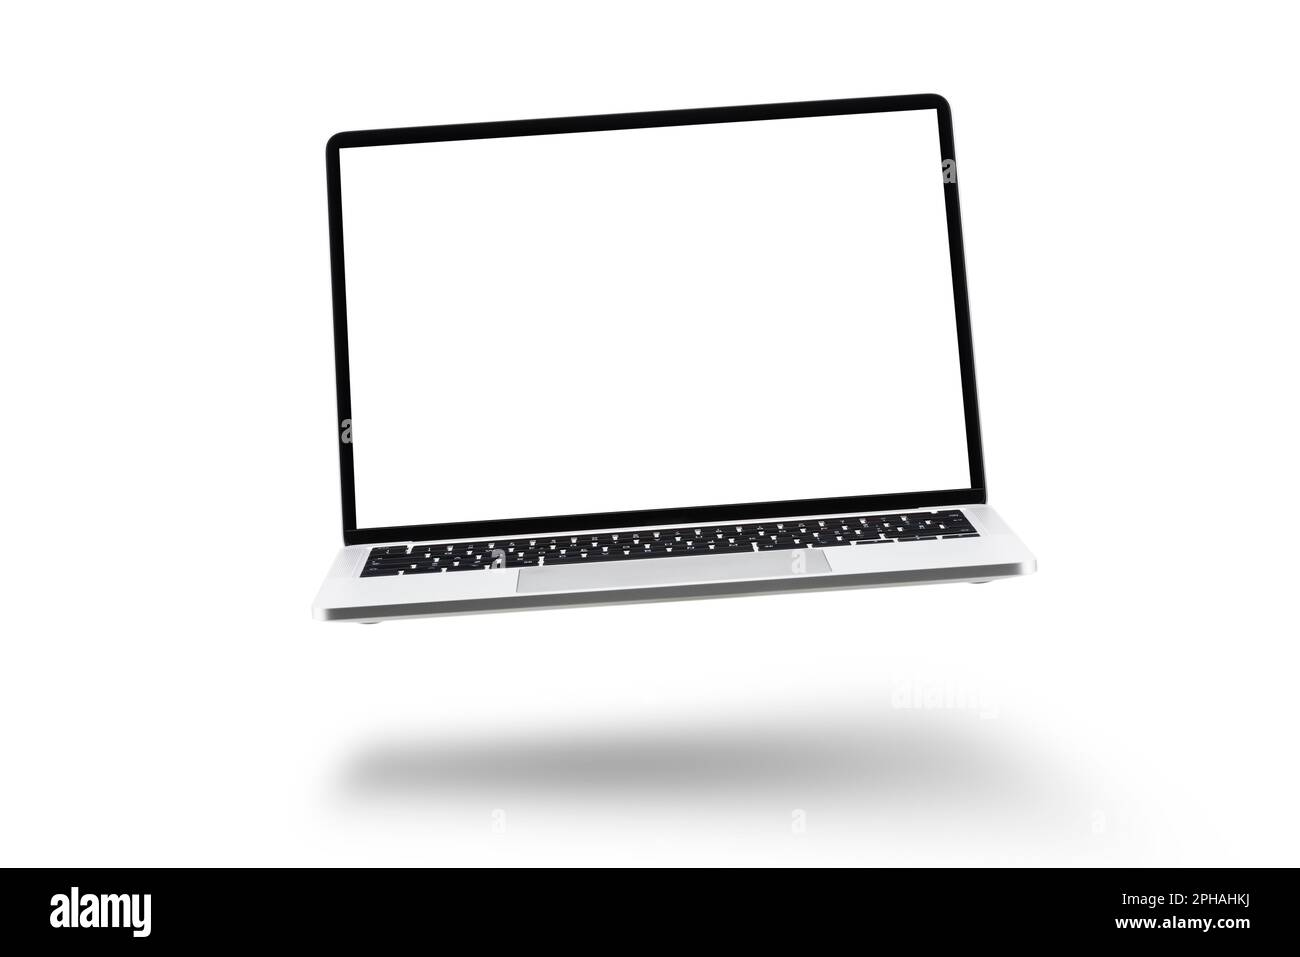 Laptop with white screen floating on white background. Stock Photo